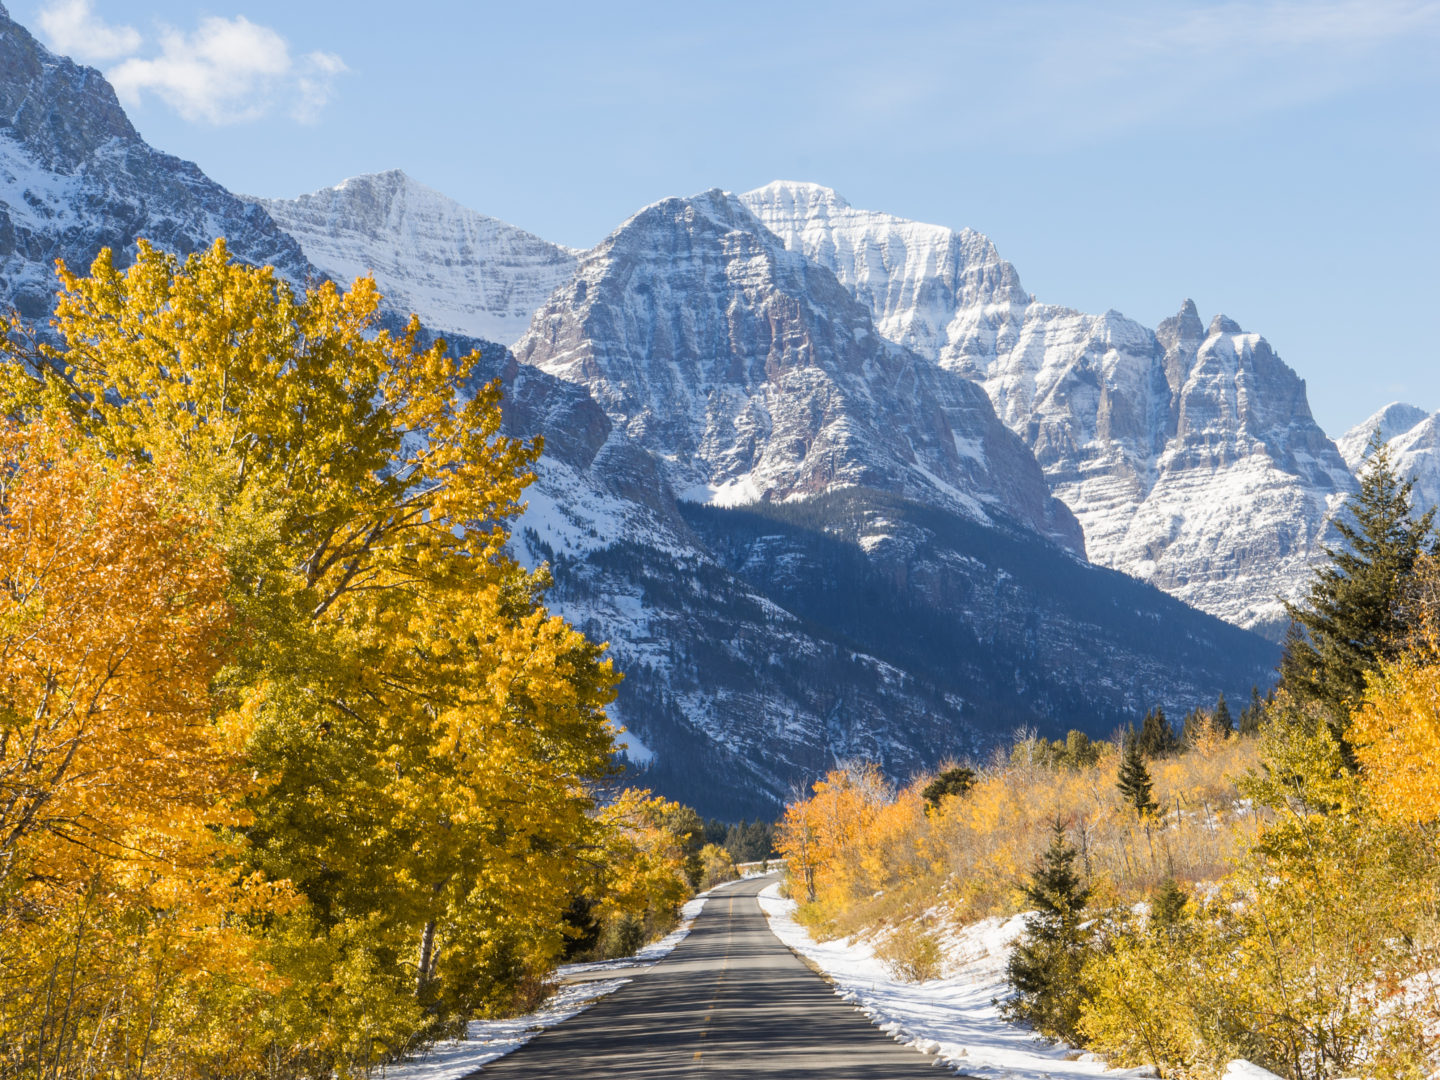 Best Fall Foliage Road Trips In The Usa